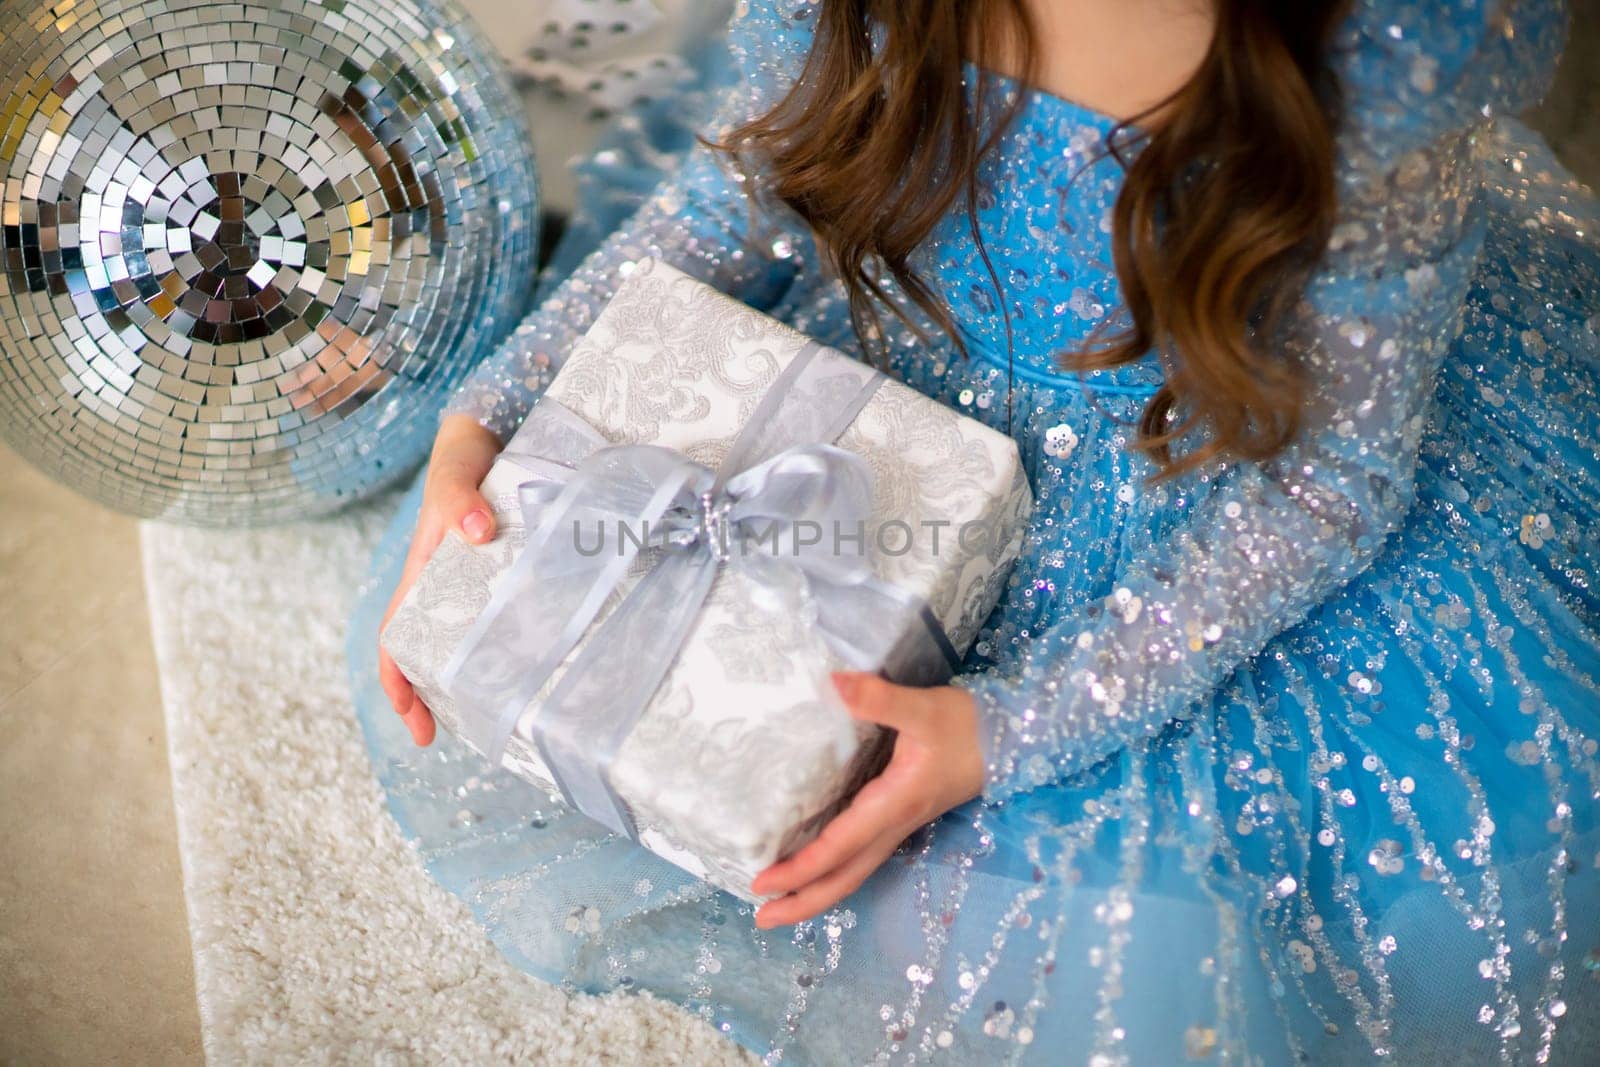 Female hands hold a gift box. Christmas, new year, birthday concept. The girl is dressed in a blue dress and holds out a gift